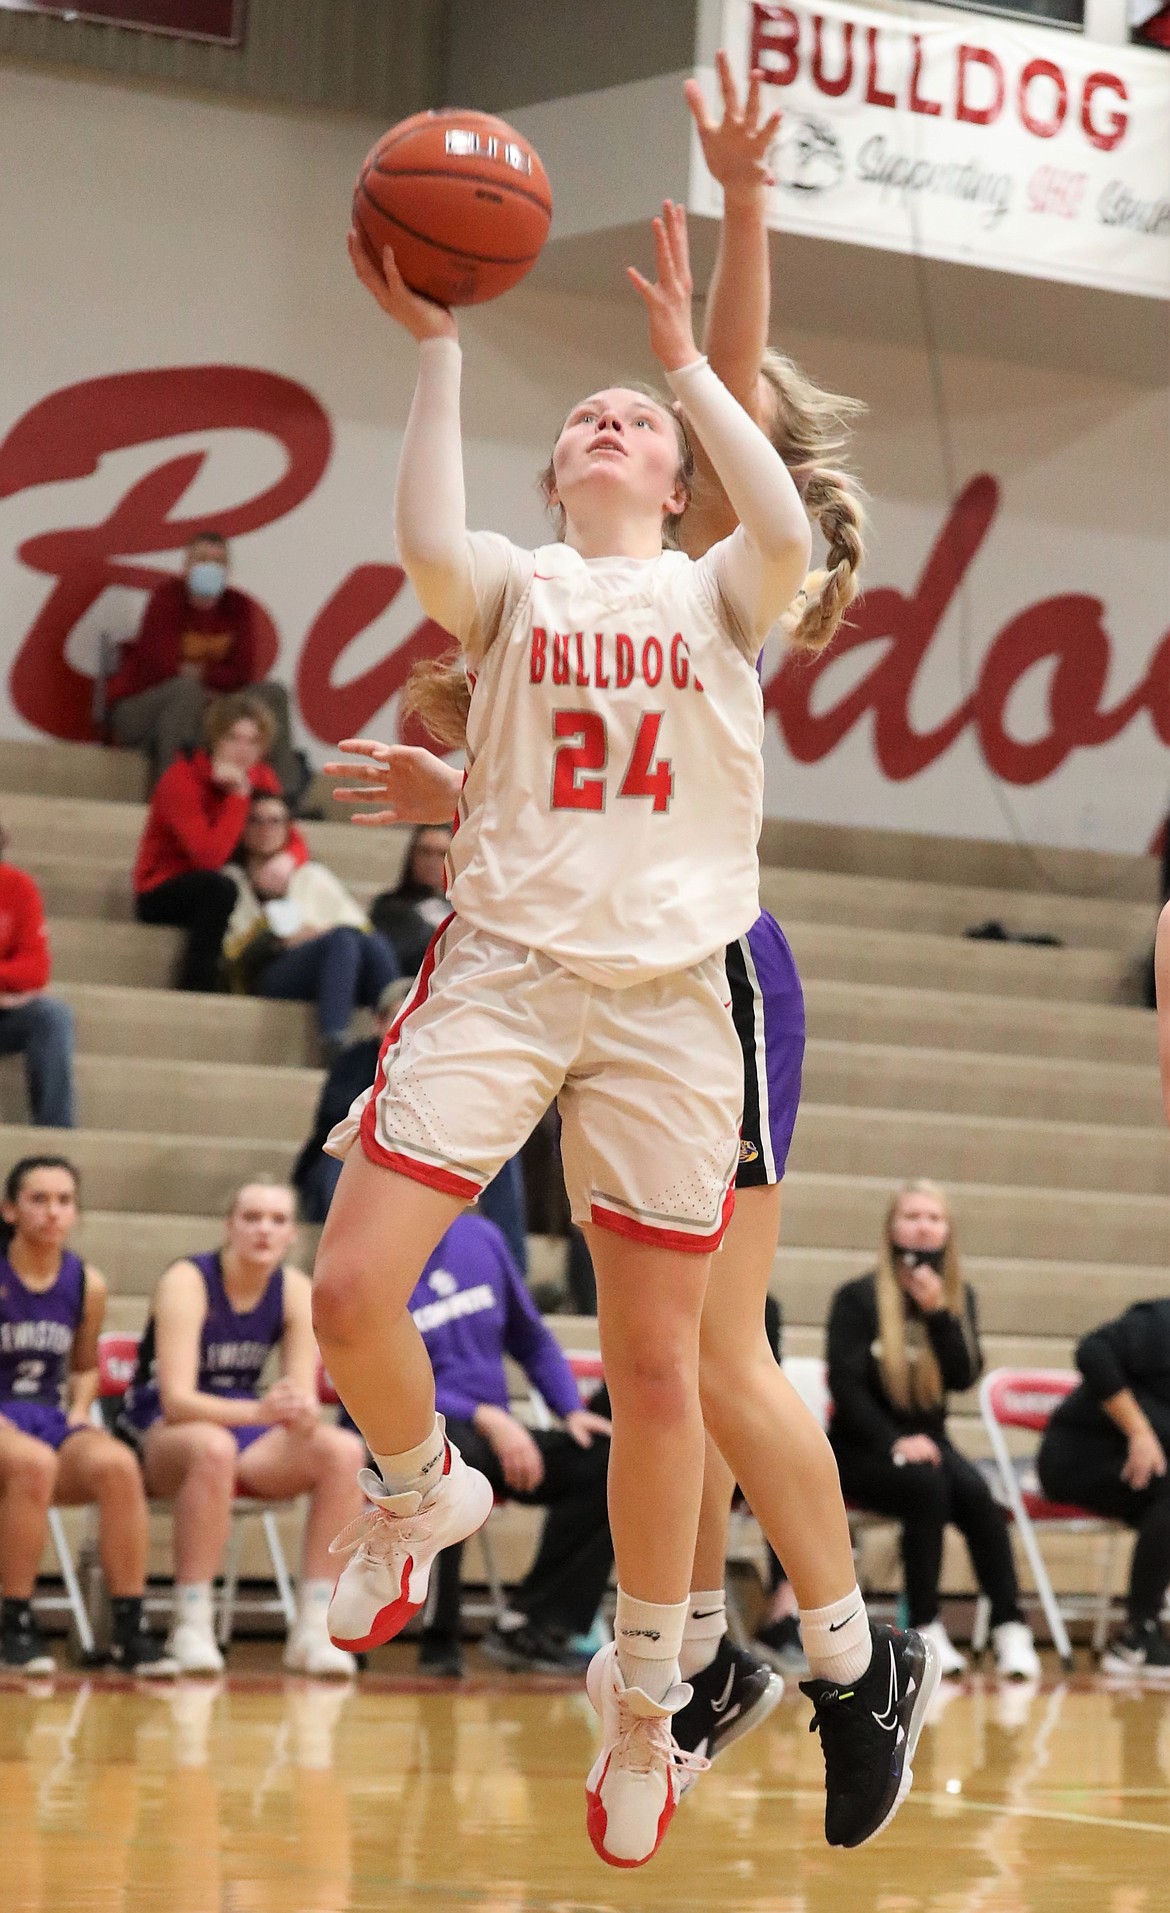 Senior Kaylee Banks attacks the basket during the first half of Saturday's game.